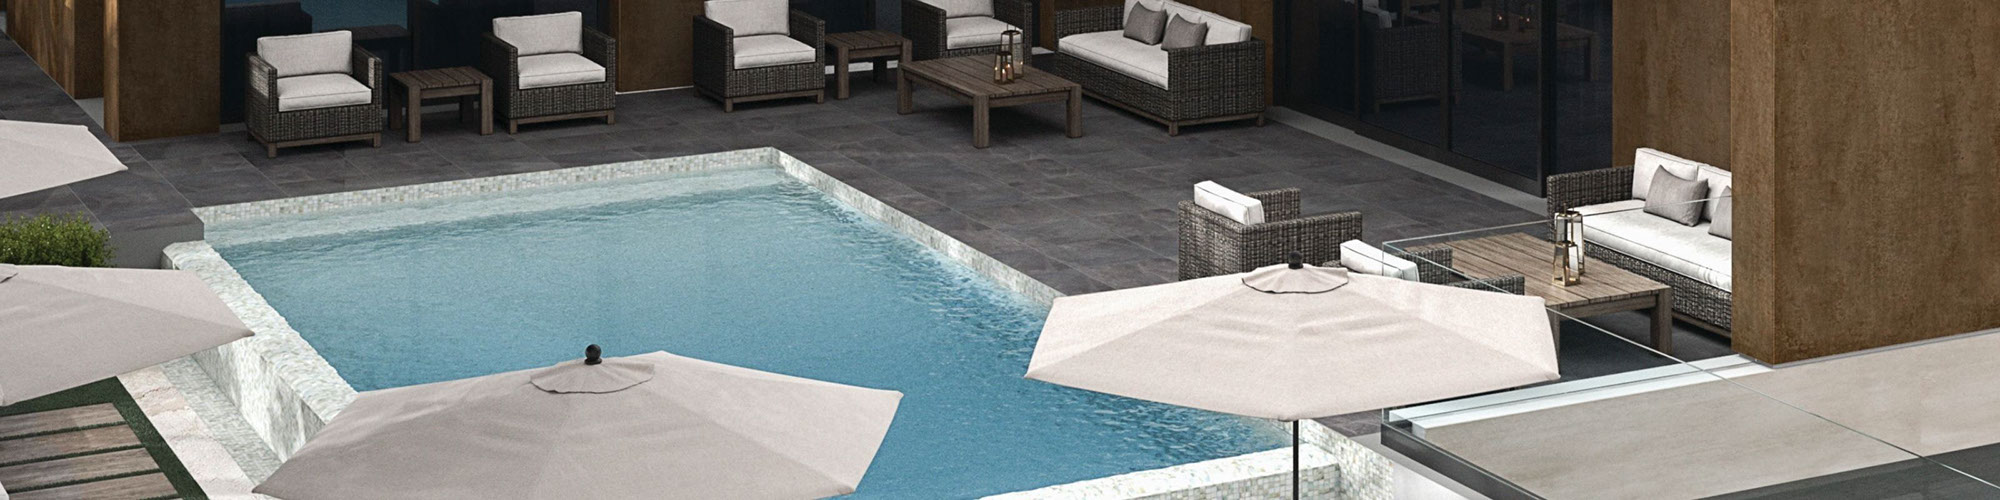 Backyard with metallic look cladding, wicker lounge chairs around pool with dark gray stone look tile and wood look paver pool deck.